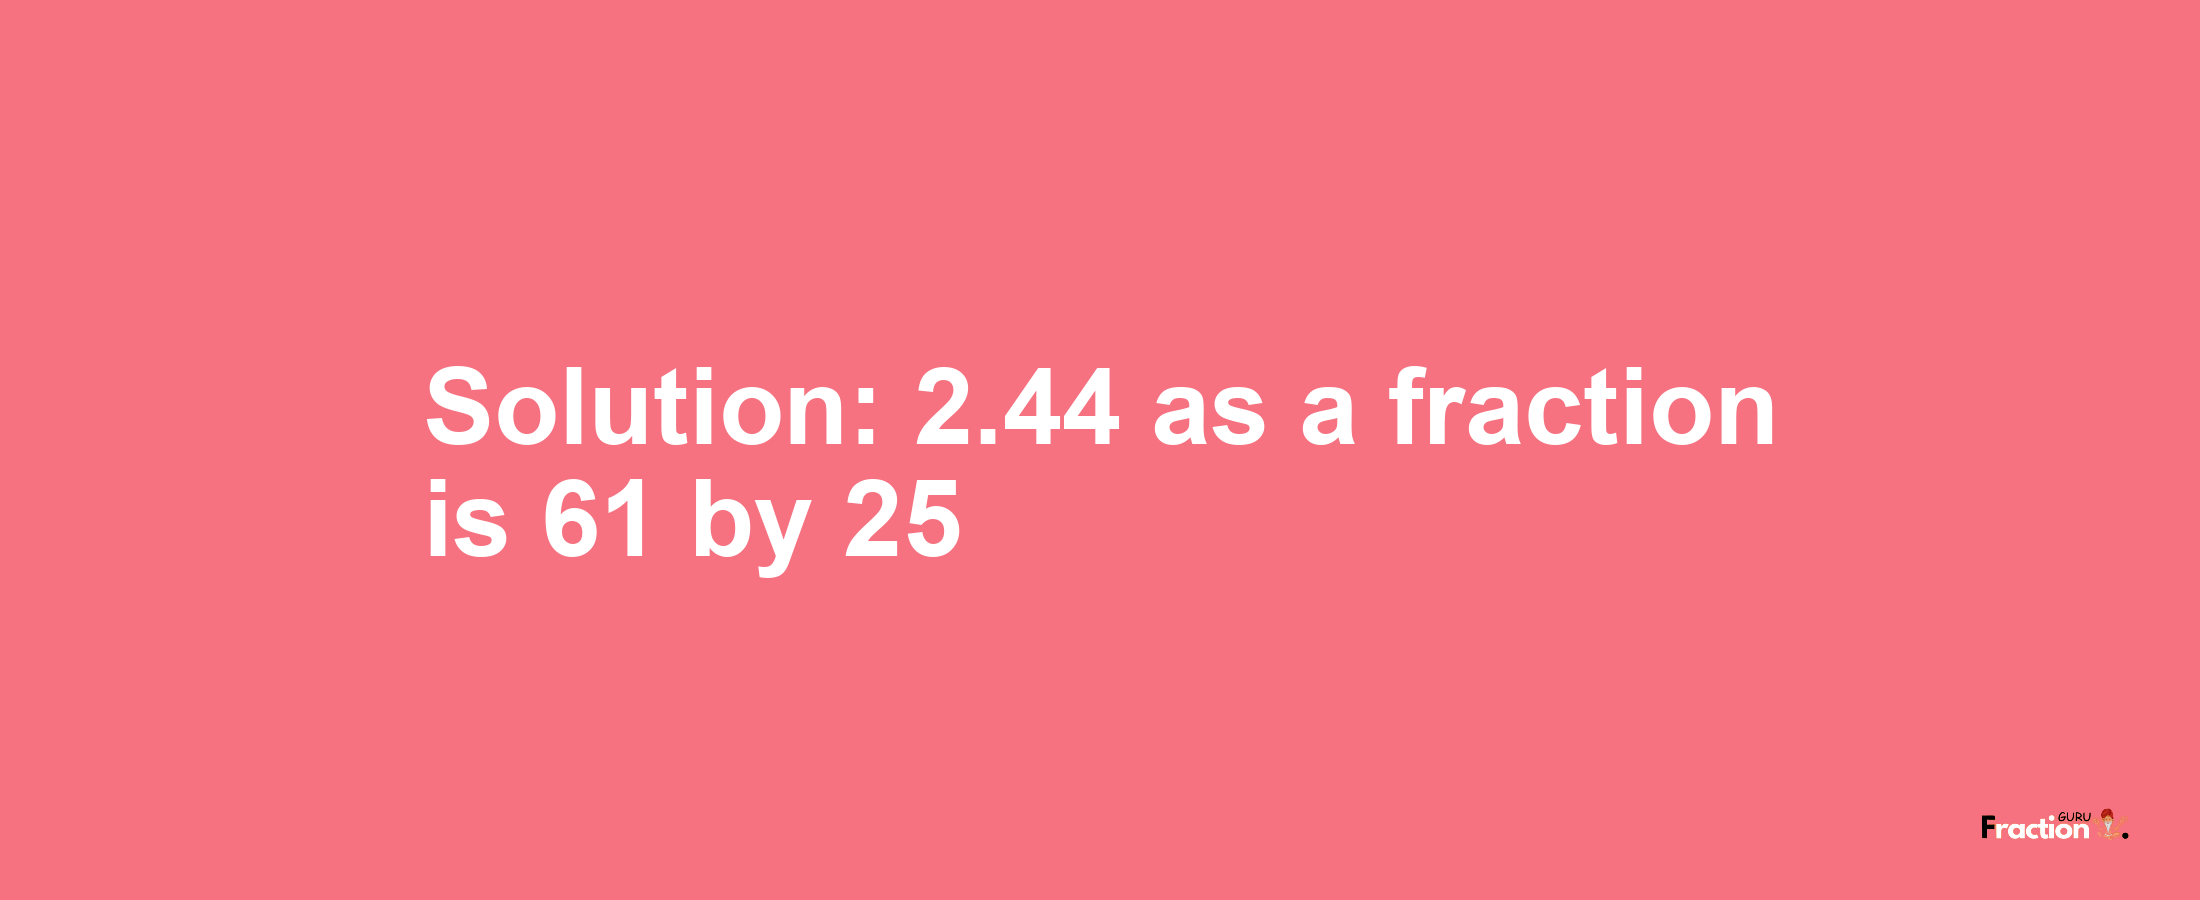 Solution:2.44 as a fraction is 61/25